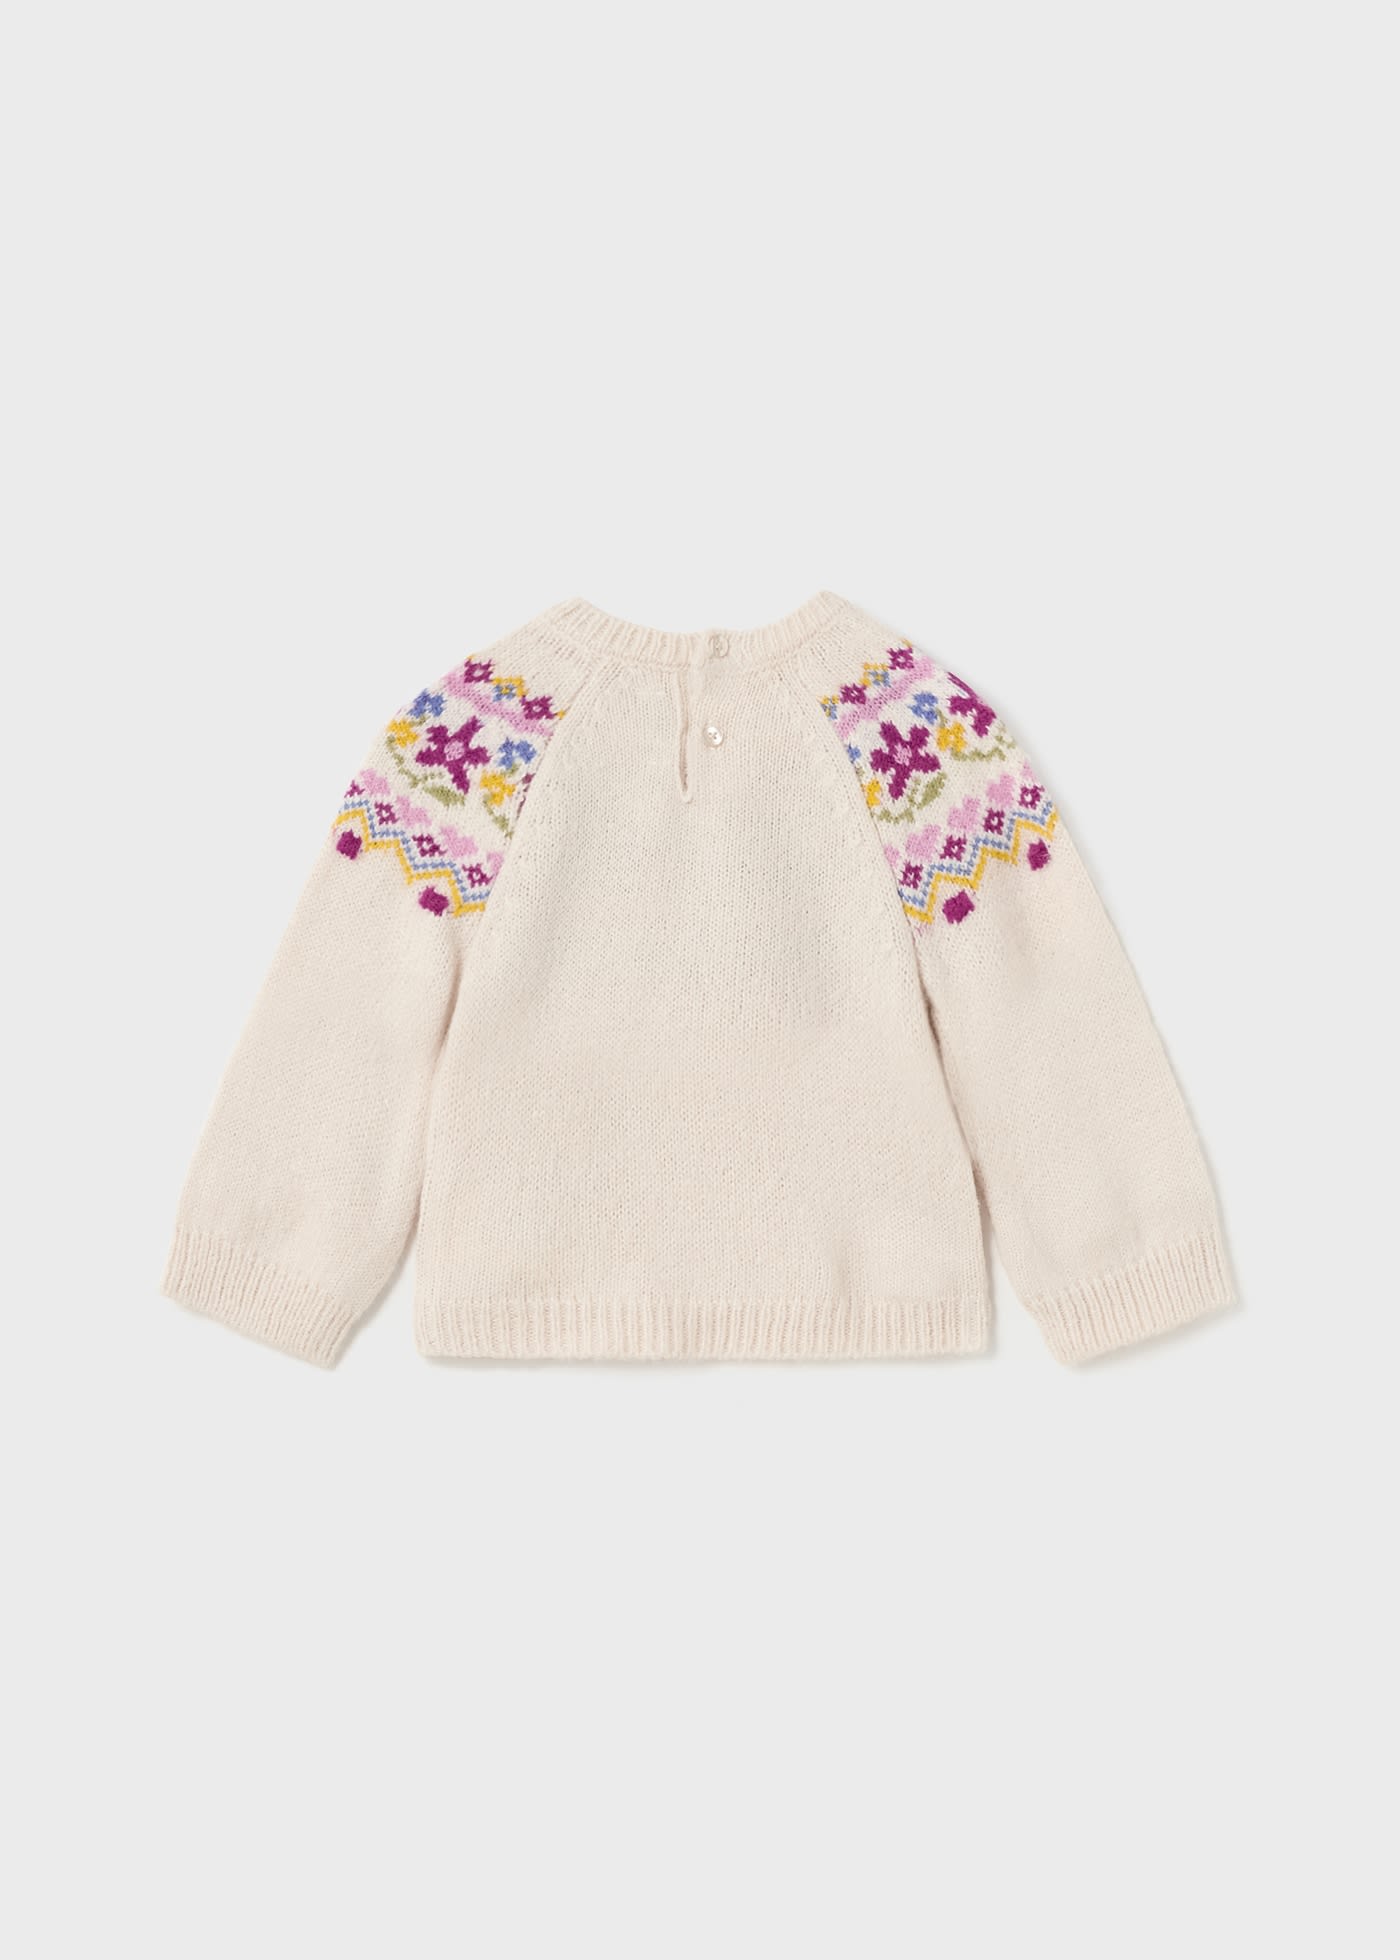 Baby jacquard sweater details